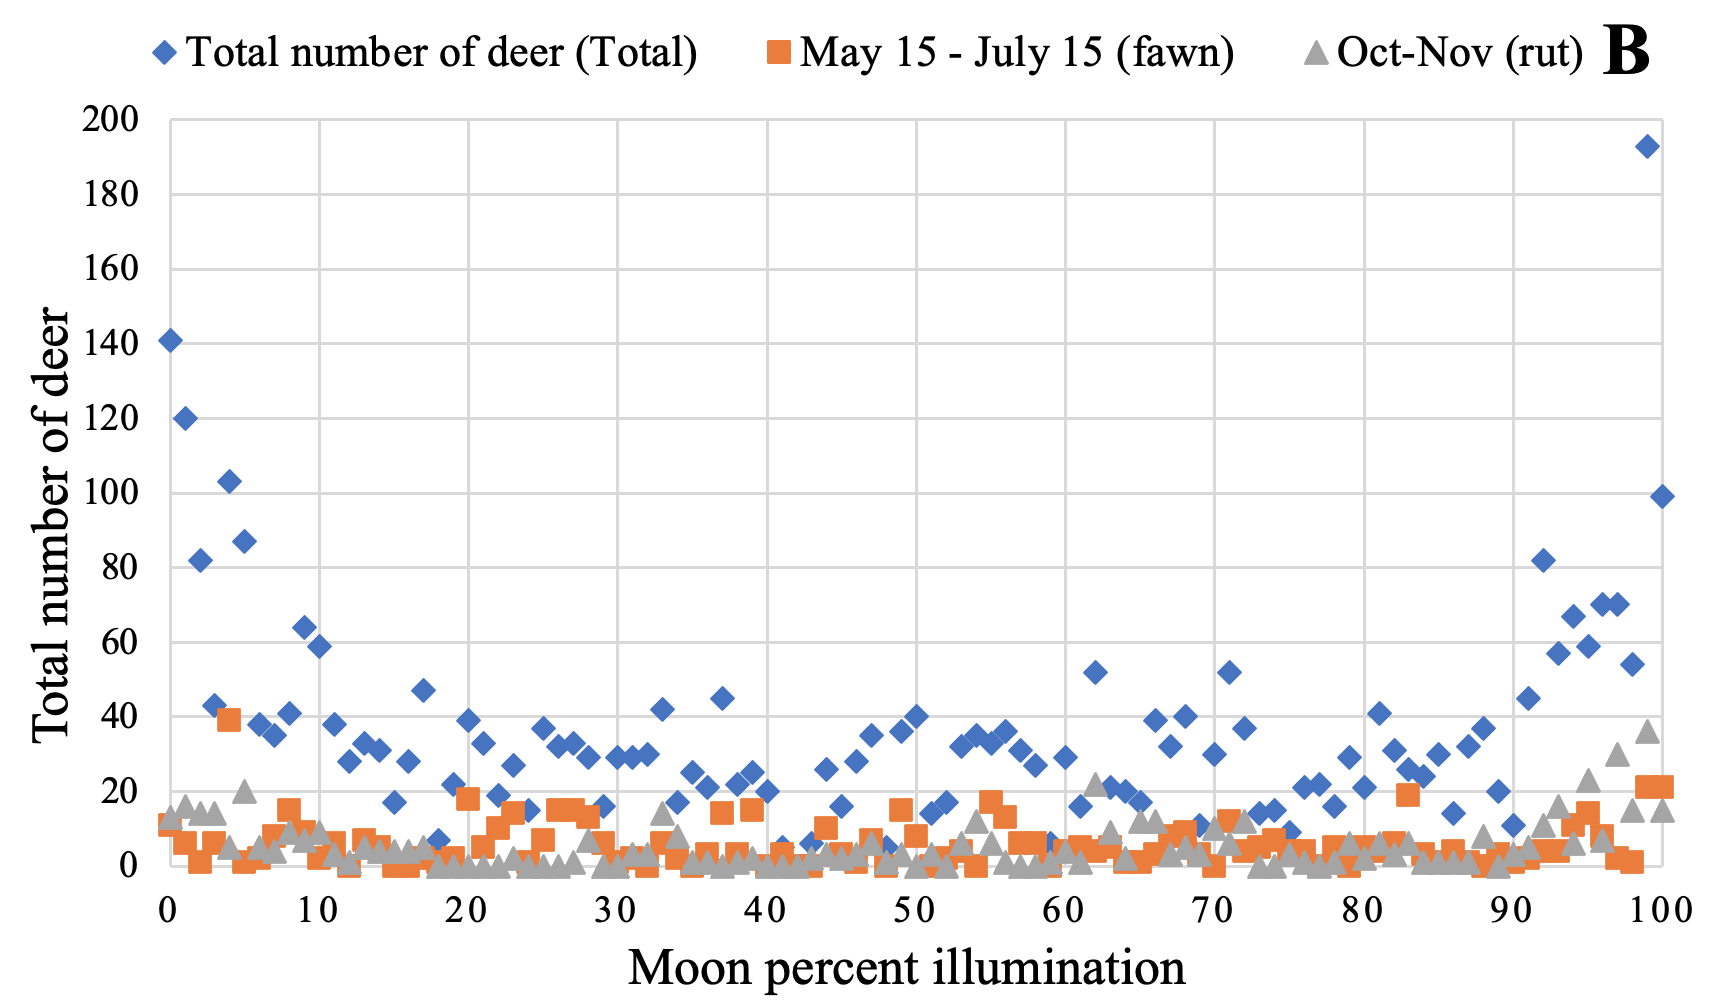 Graphical analyses of the moon phase versus total number of deer, subdivided by major reproductive events, such as fawning and the rut. 